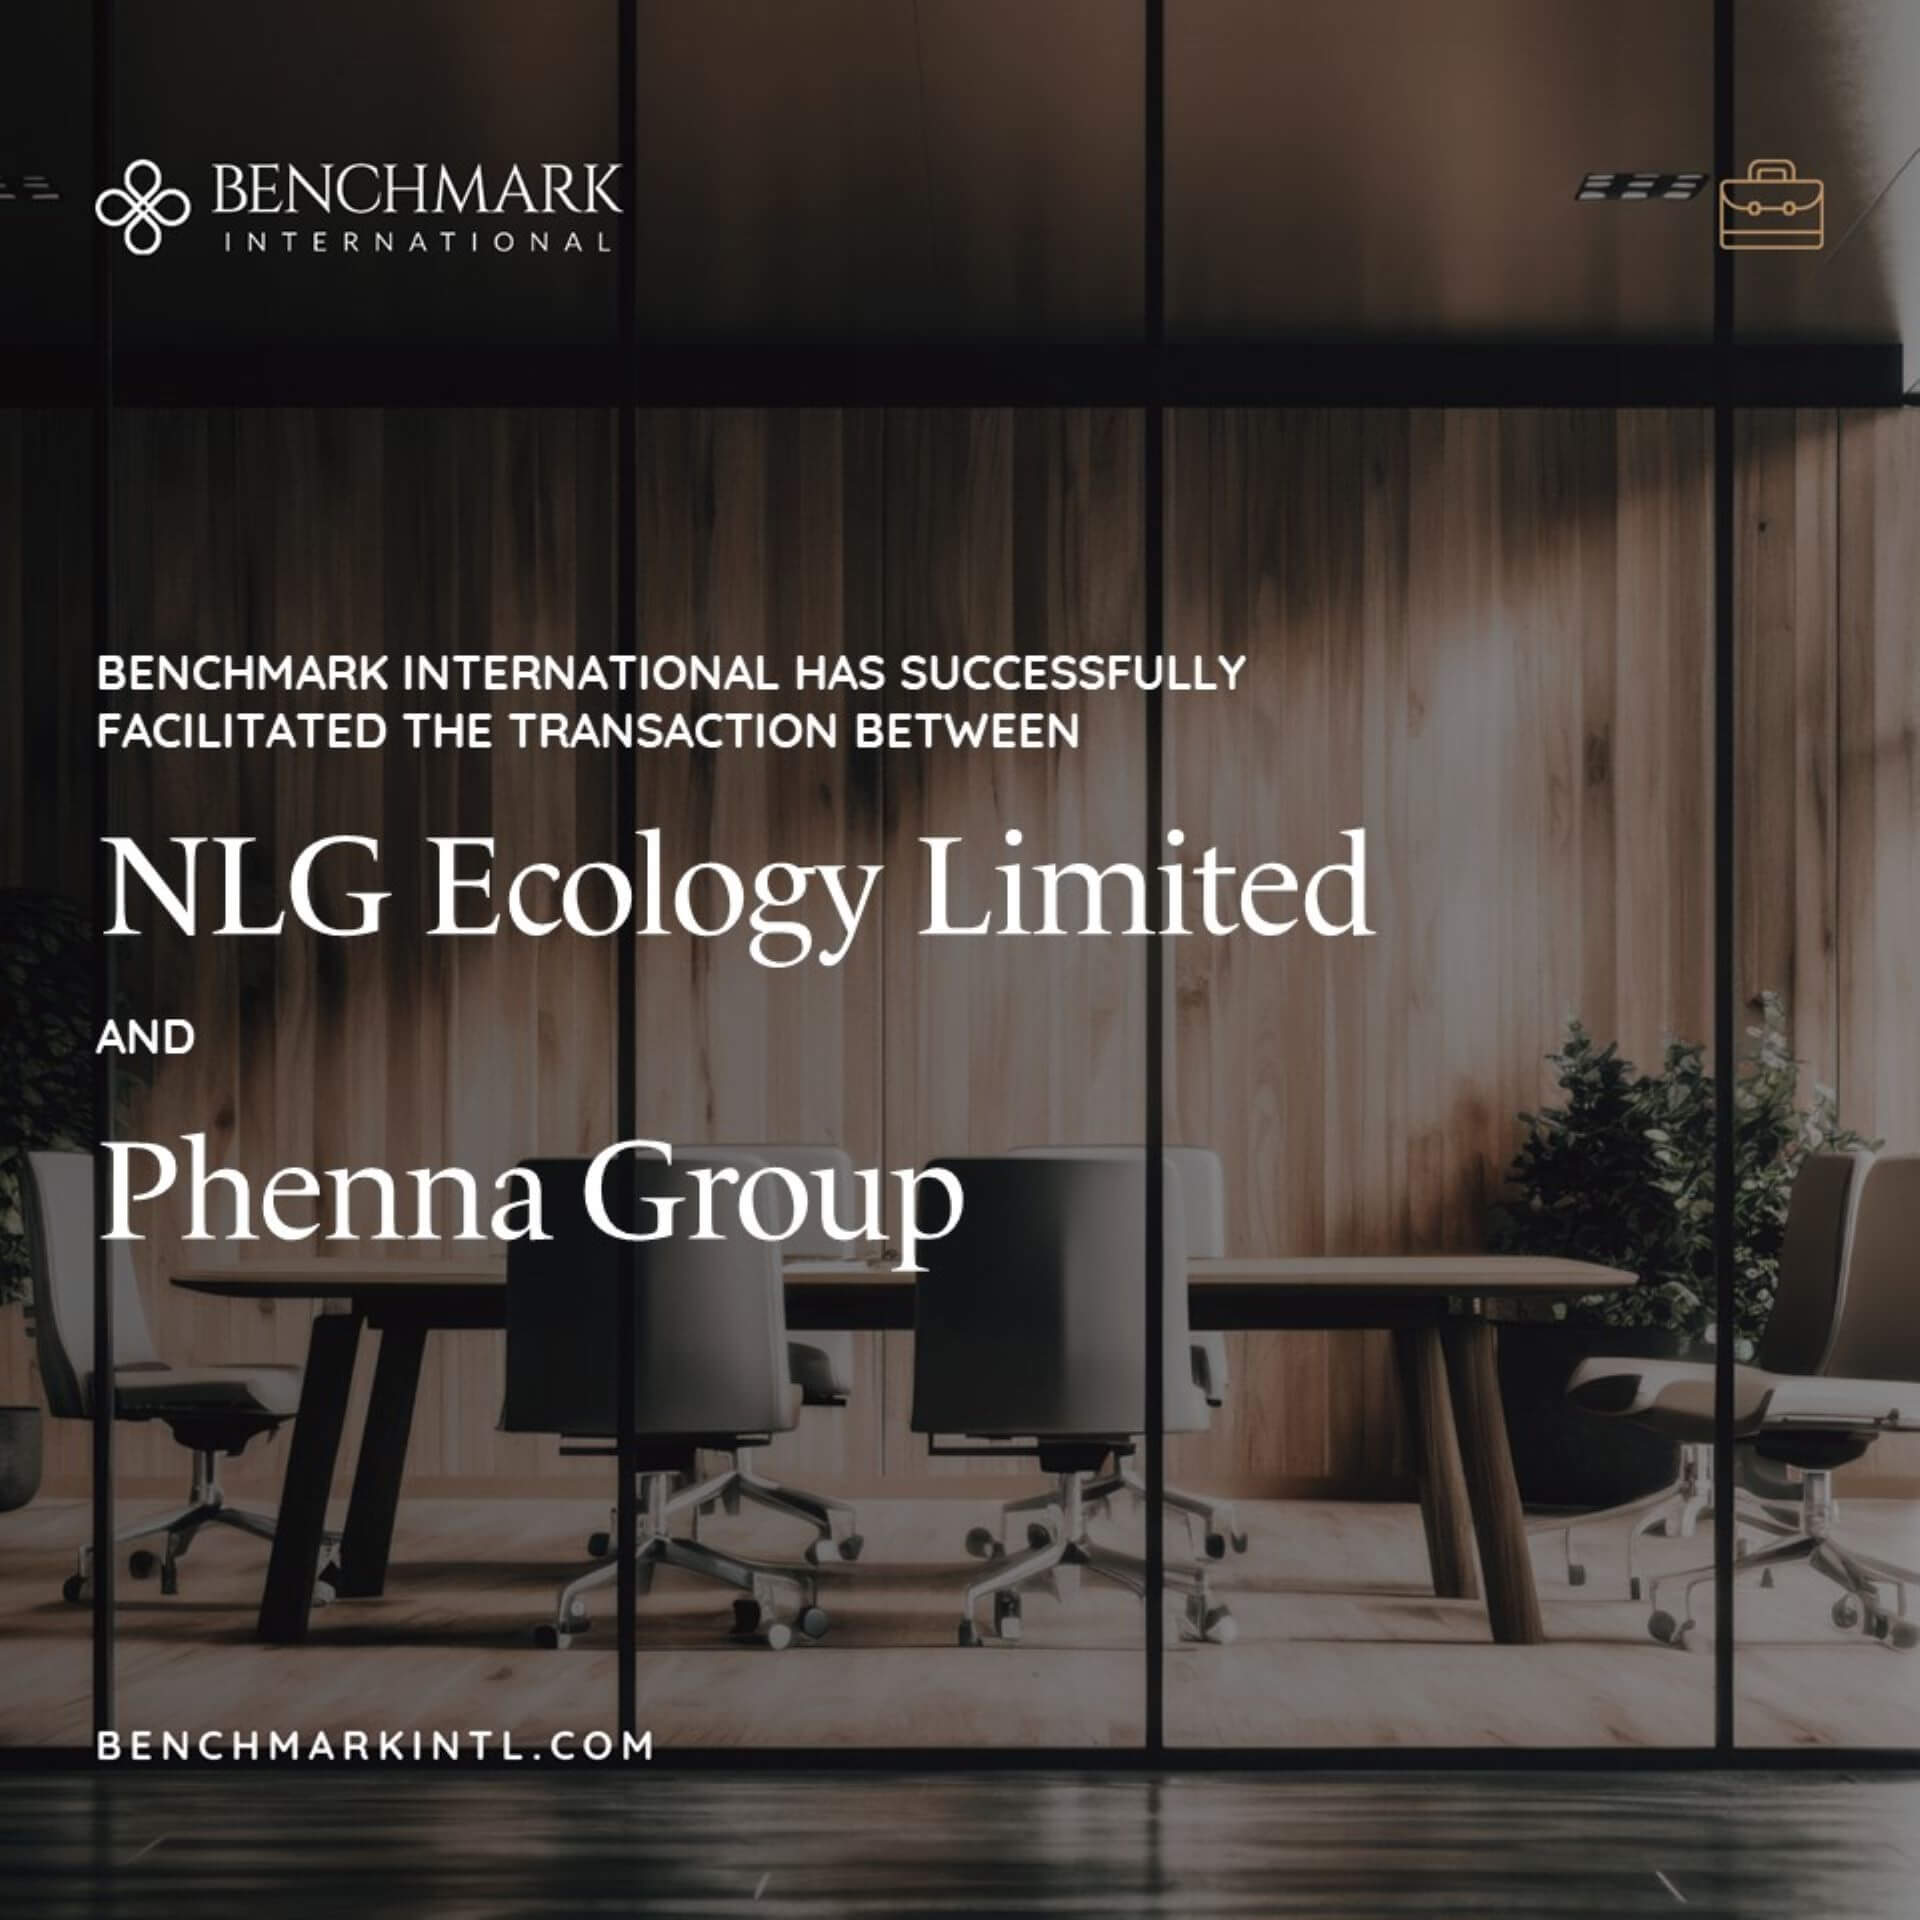 NLG acquired by Phenna